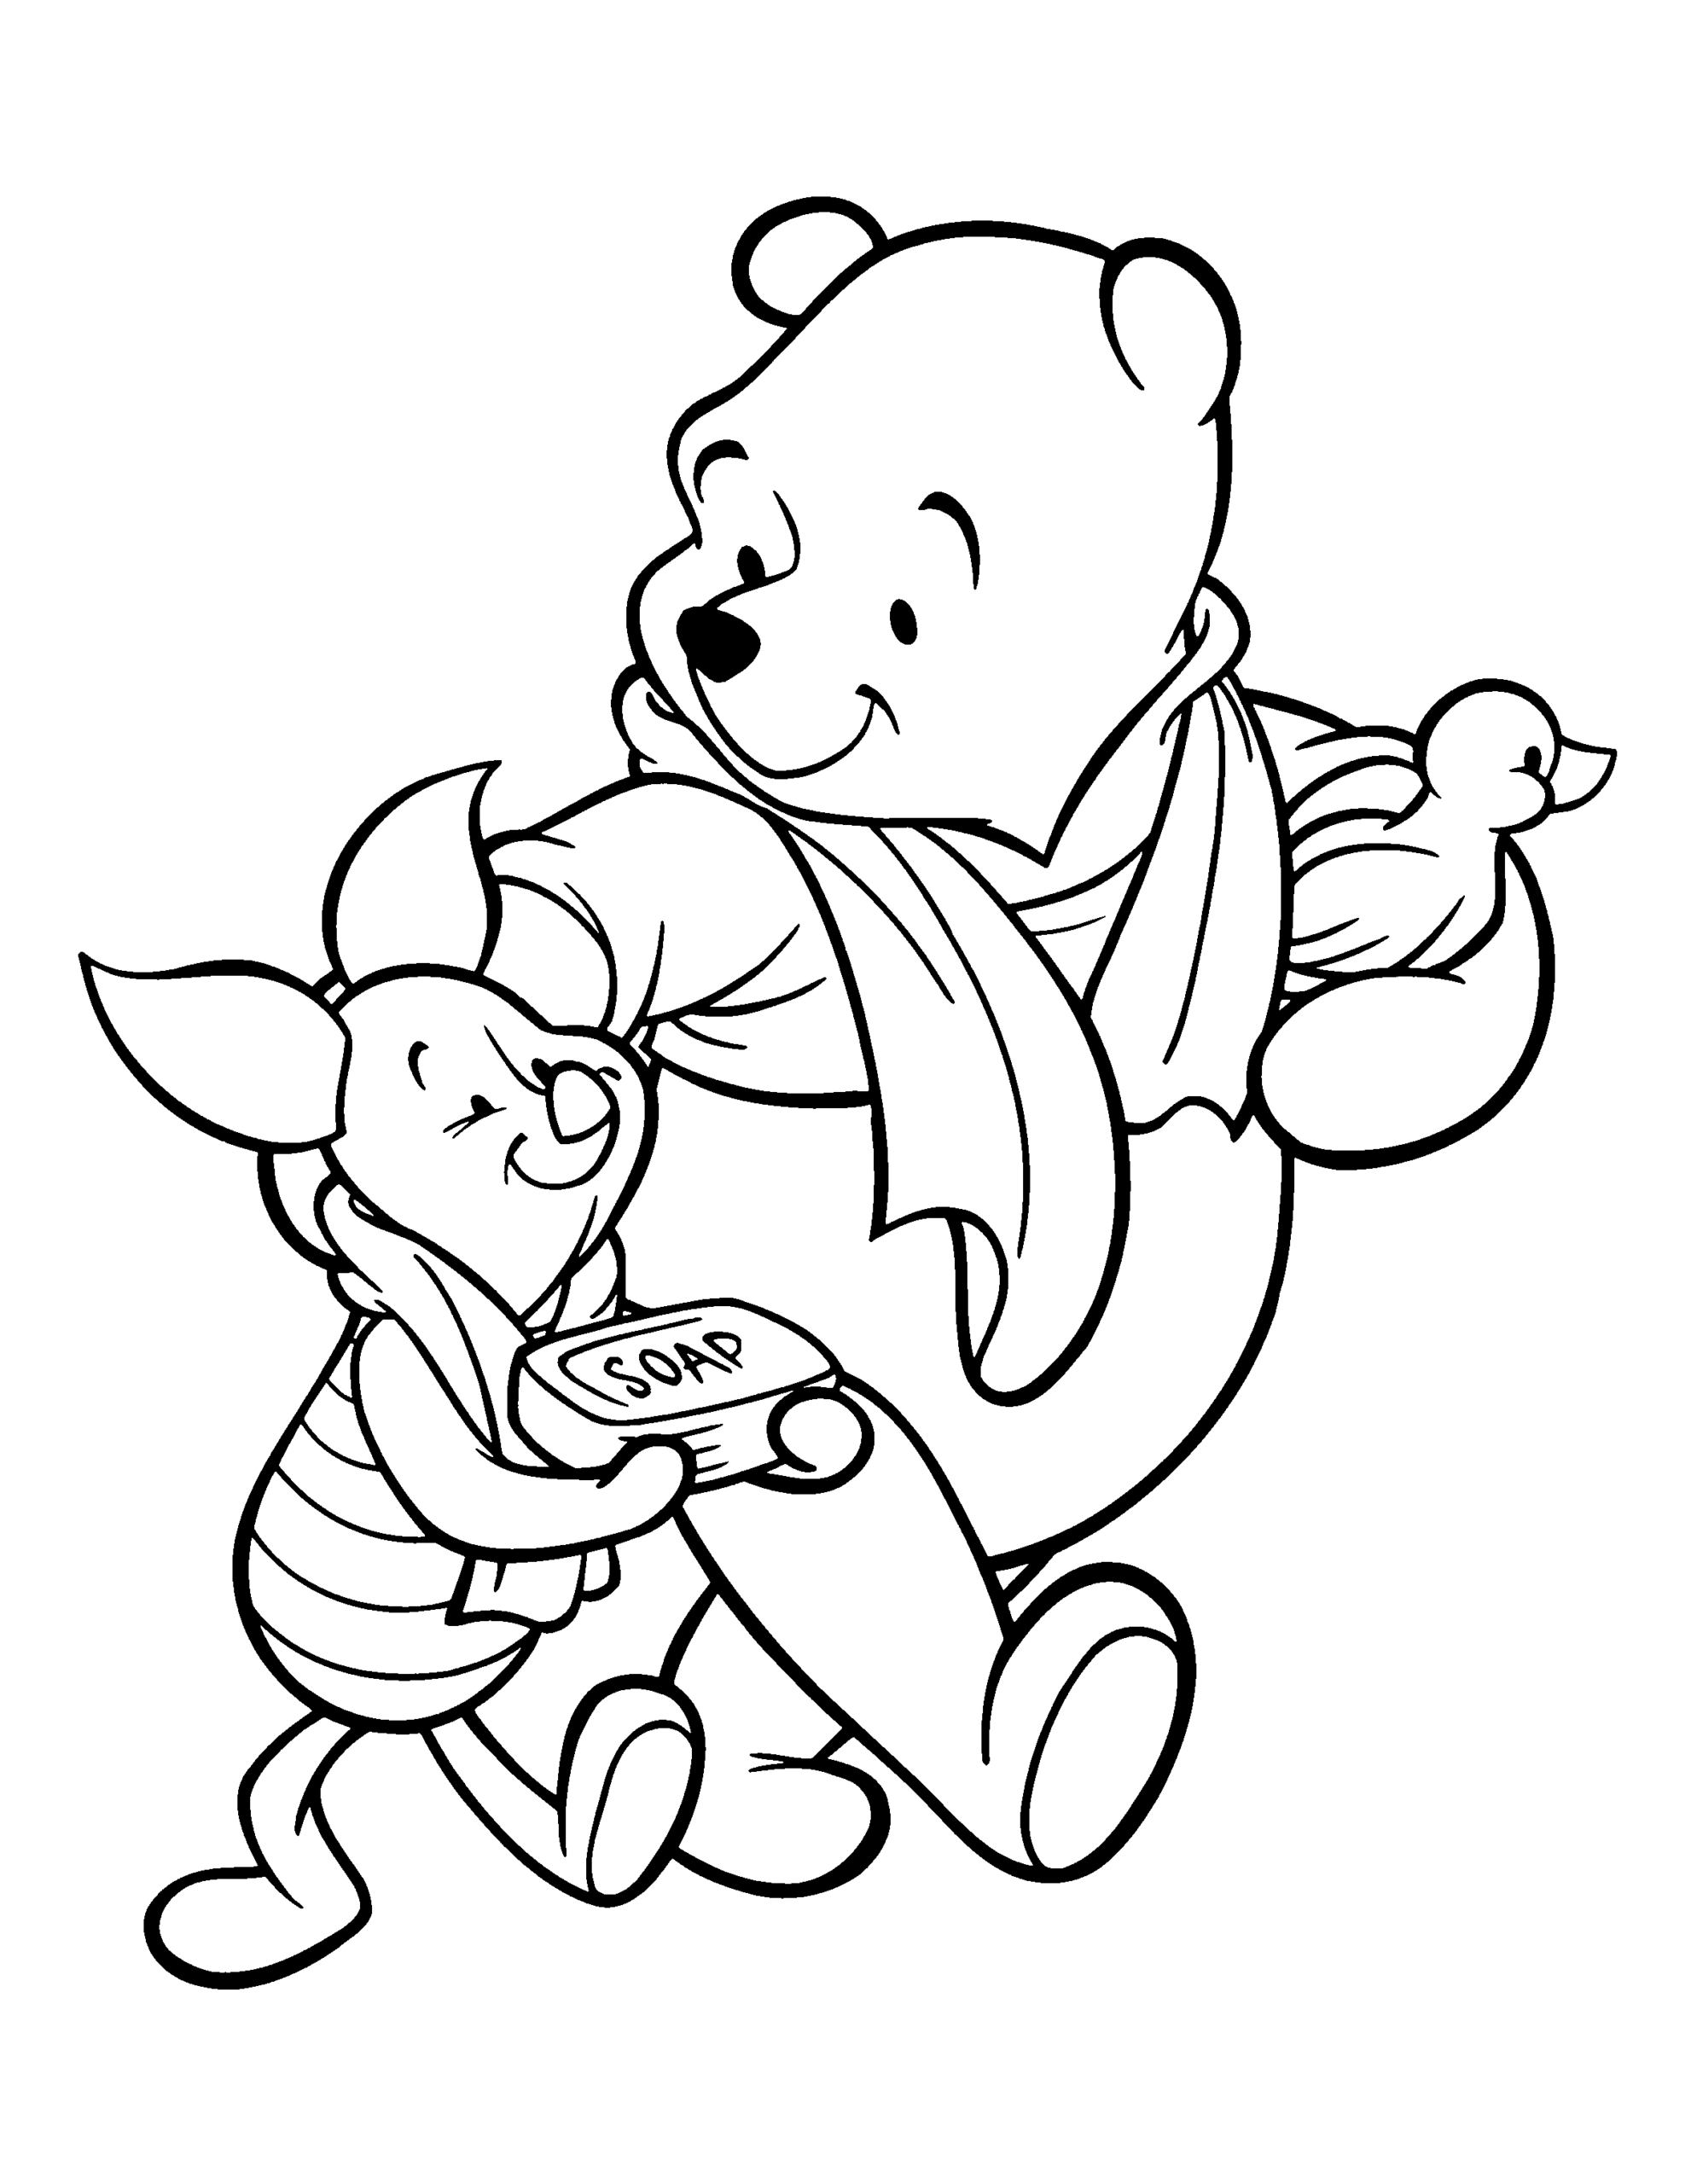 Winnie the Pooh Coloring Pages Cartoons winnie the pooh 105 Printable 2020 7084 Coloring4free